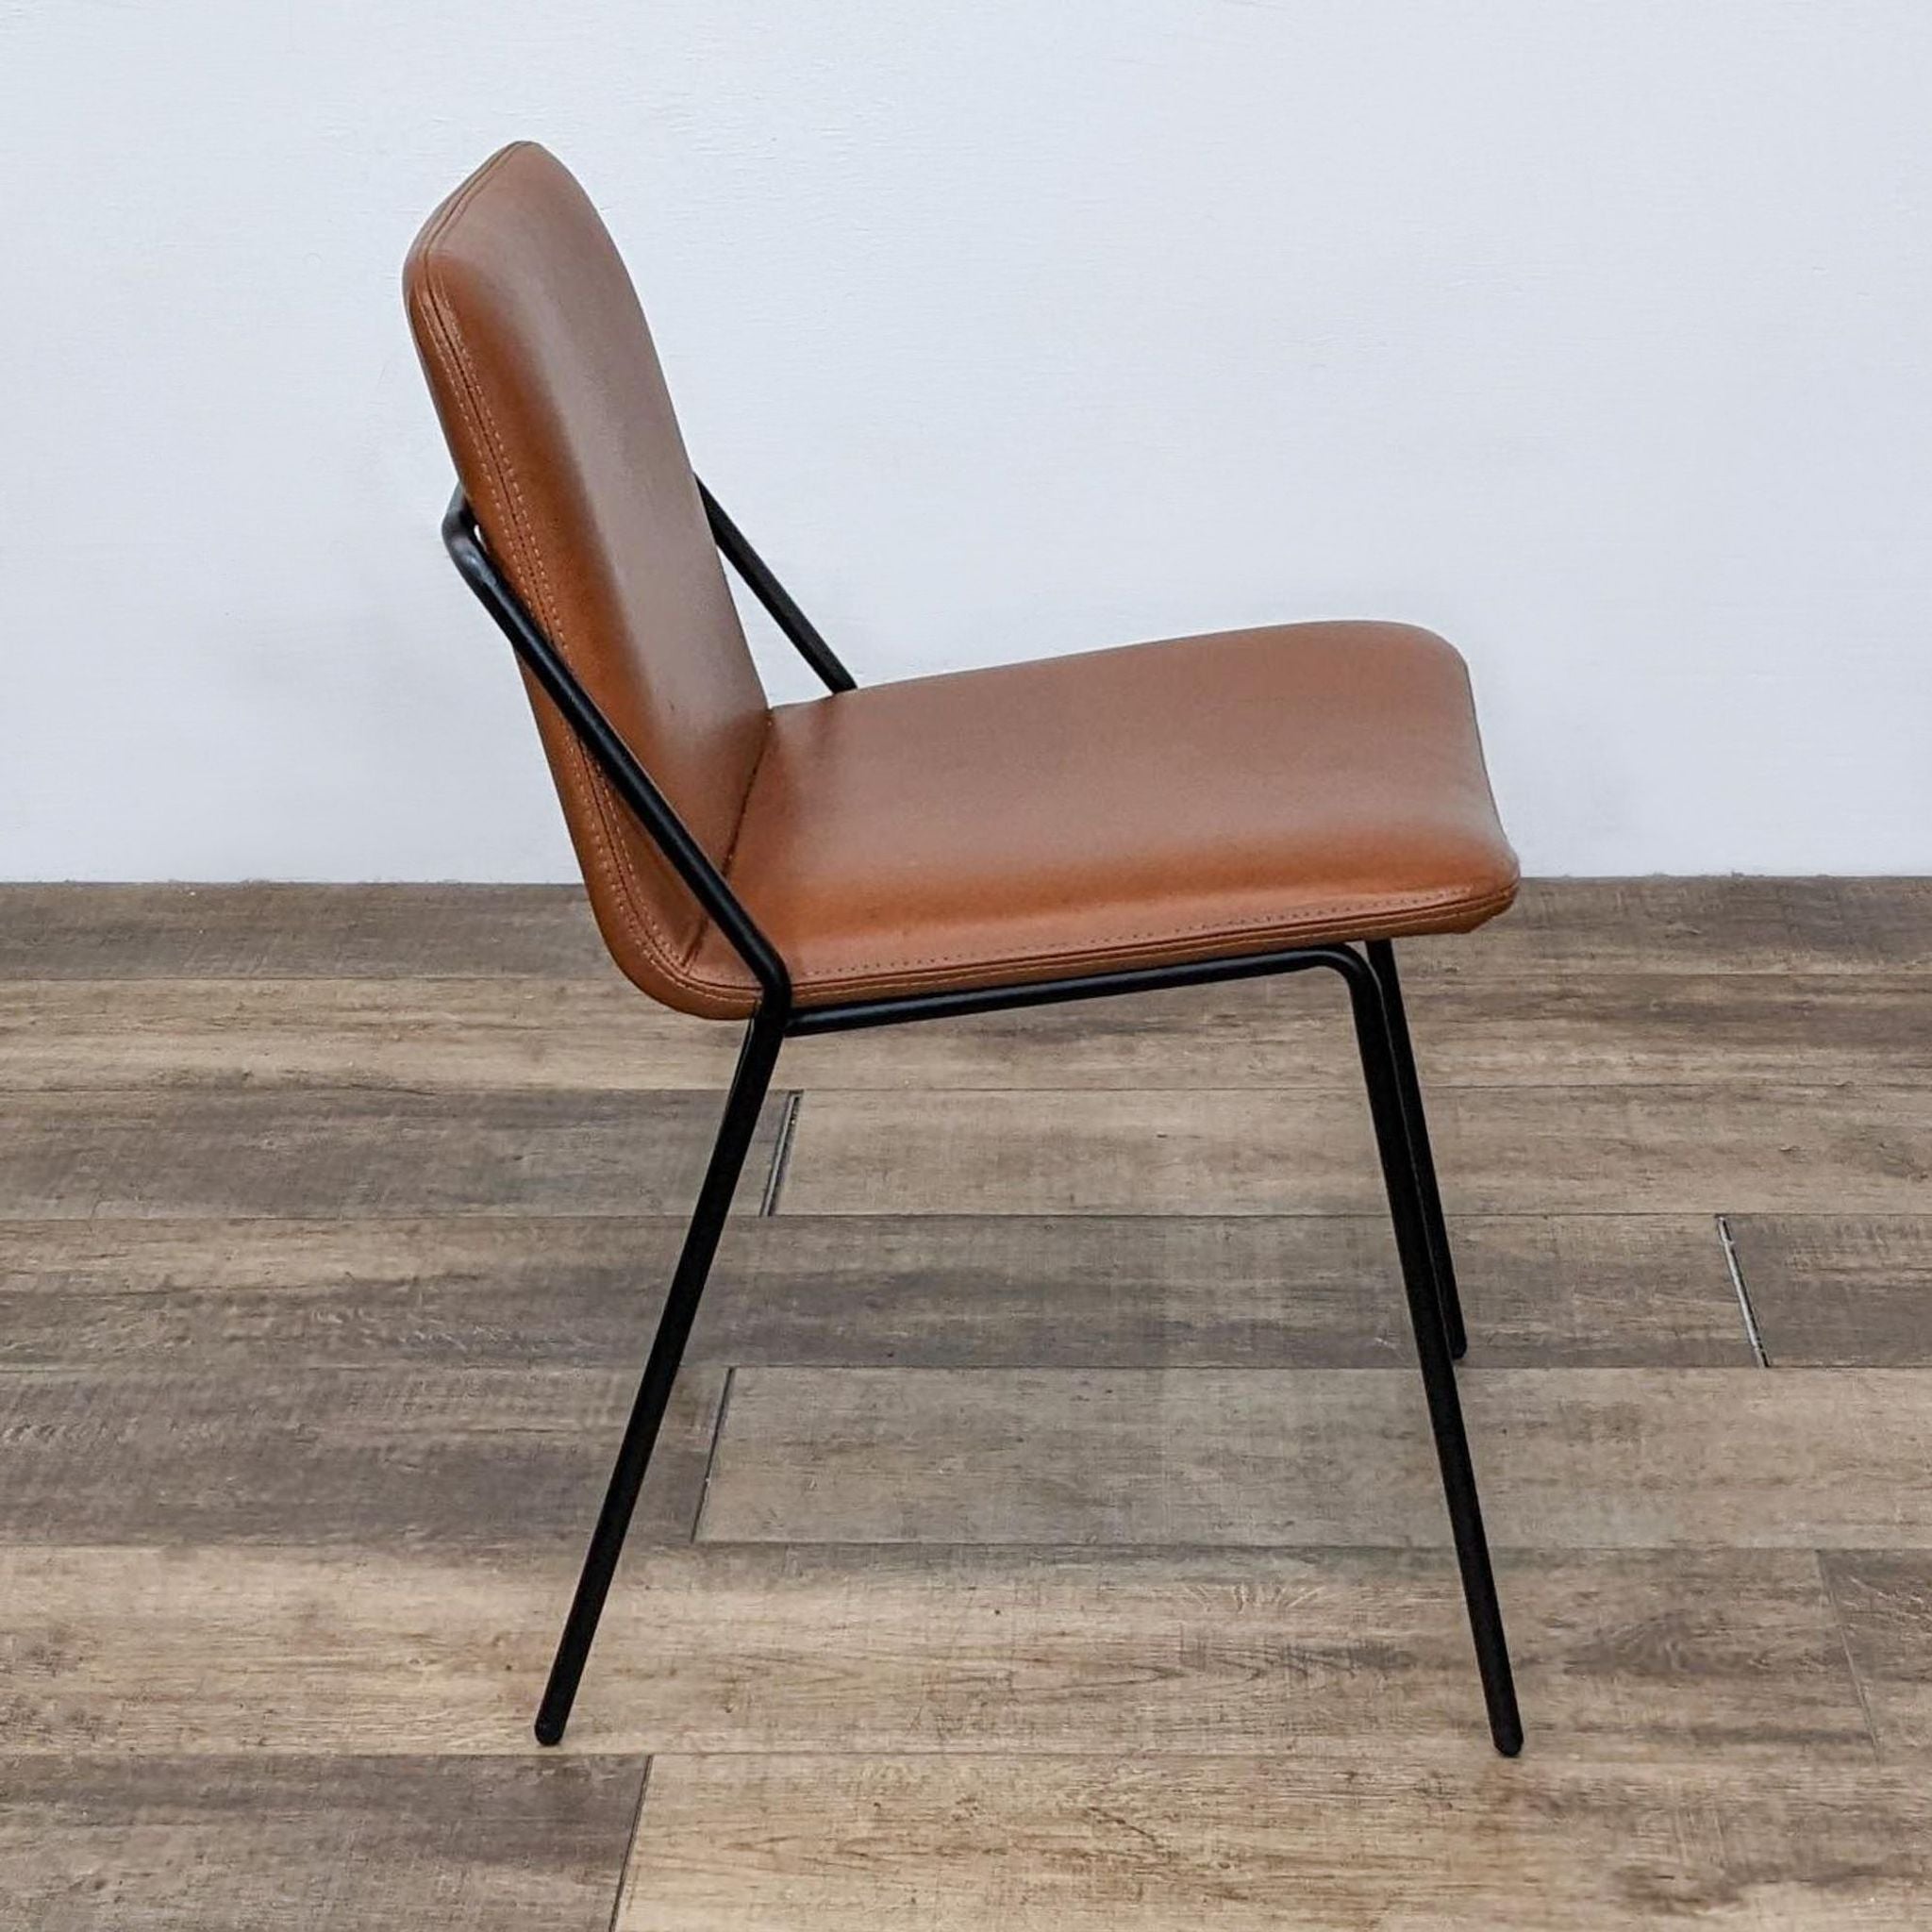 Angle view of Reperch contemporary dining chair with structural back leg and vegan leather seat against wall.